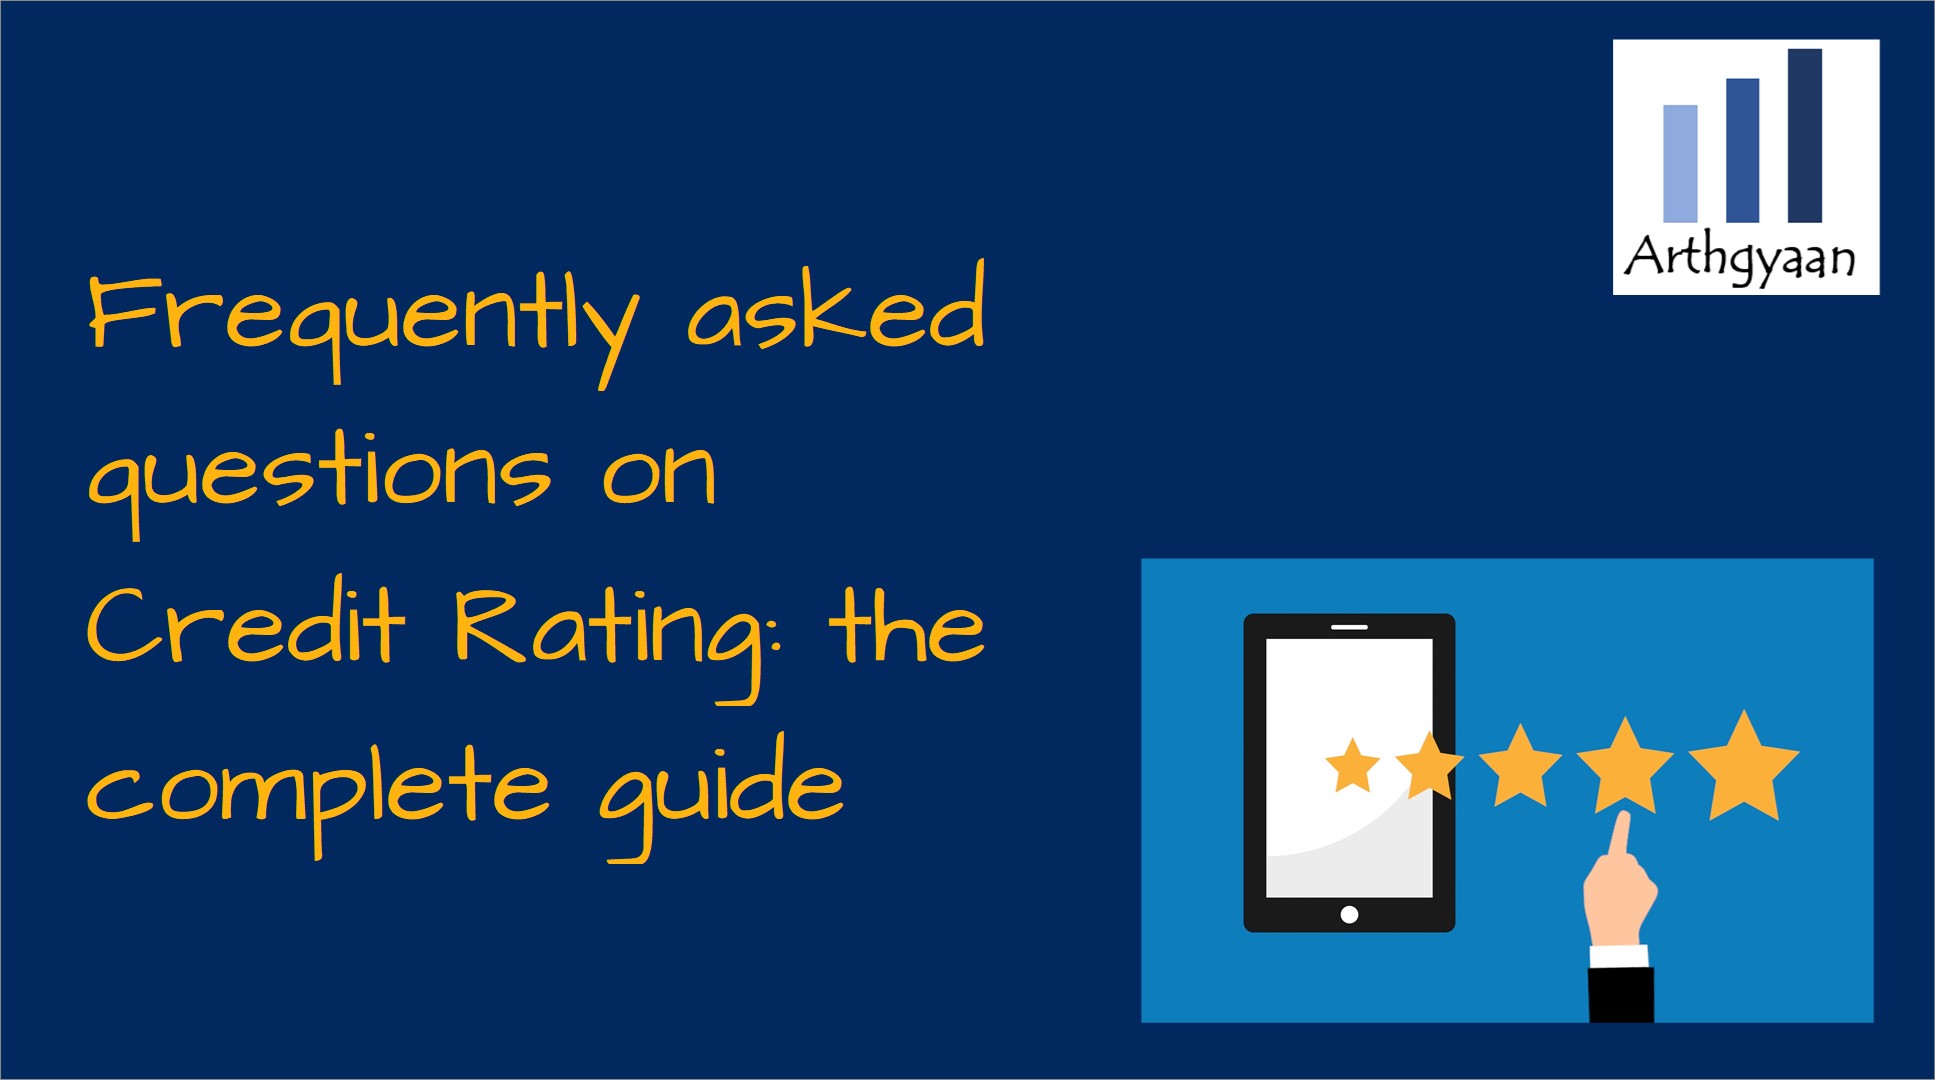 Frequently asked questions on Credit Rating: the complete guide